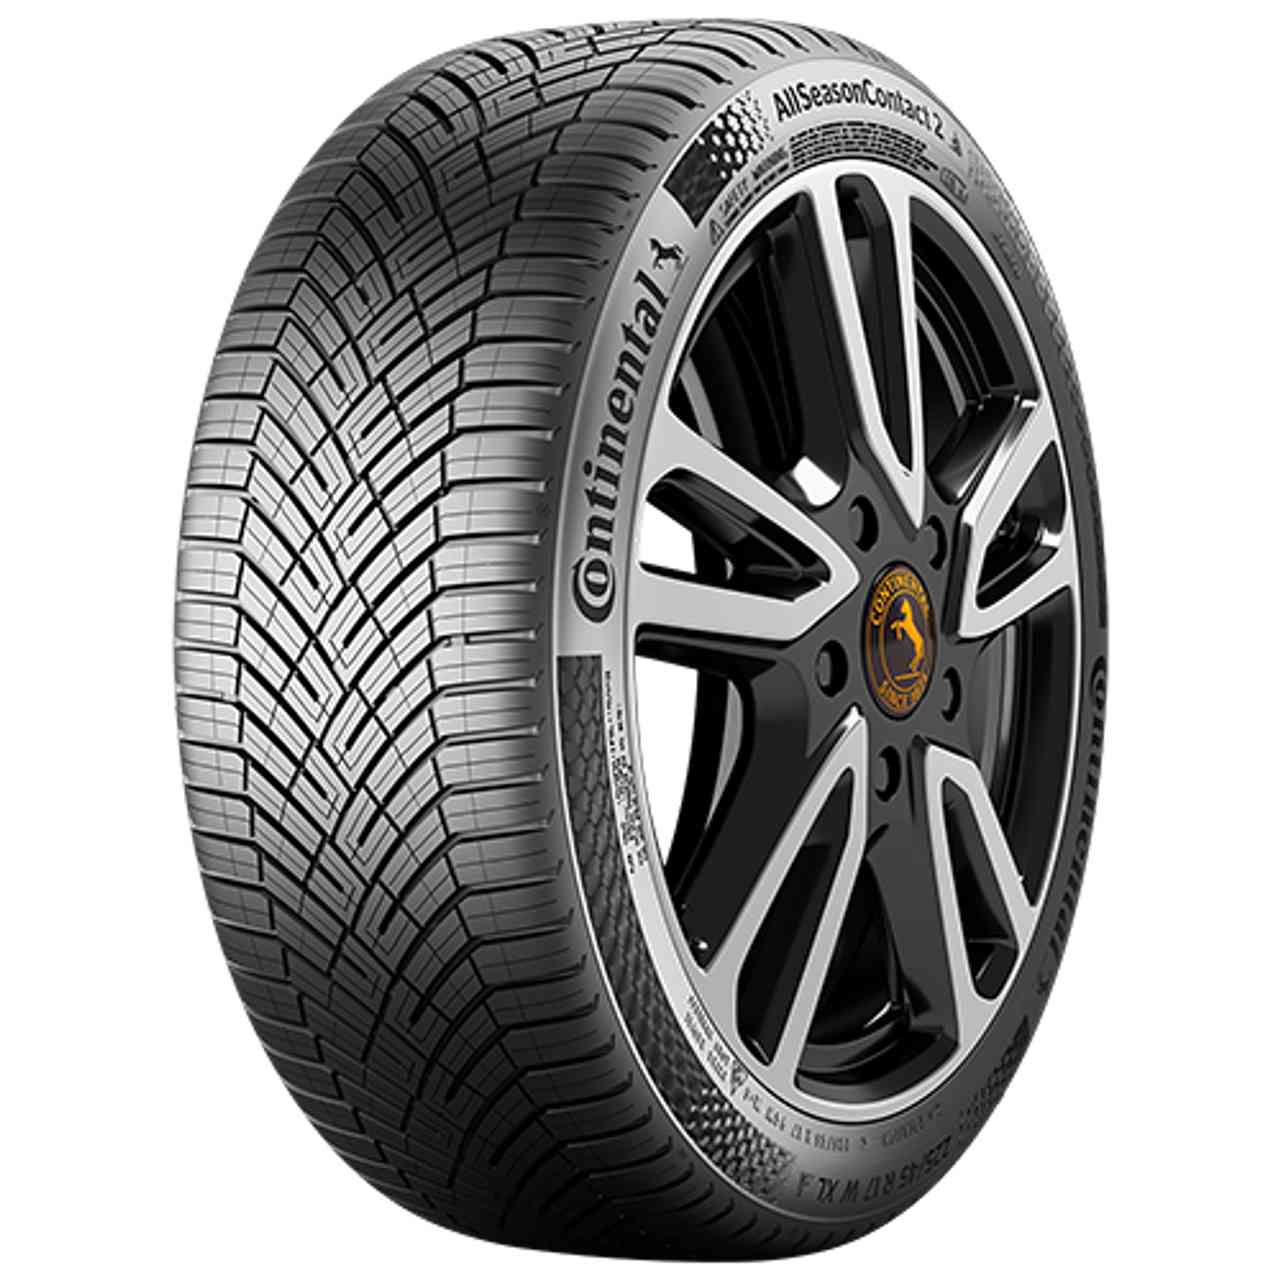 CONTINENTAL ALLSEASONCONTACT 2 (EVc) 185/50R16 81H FR BSW